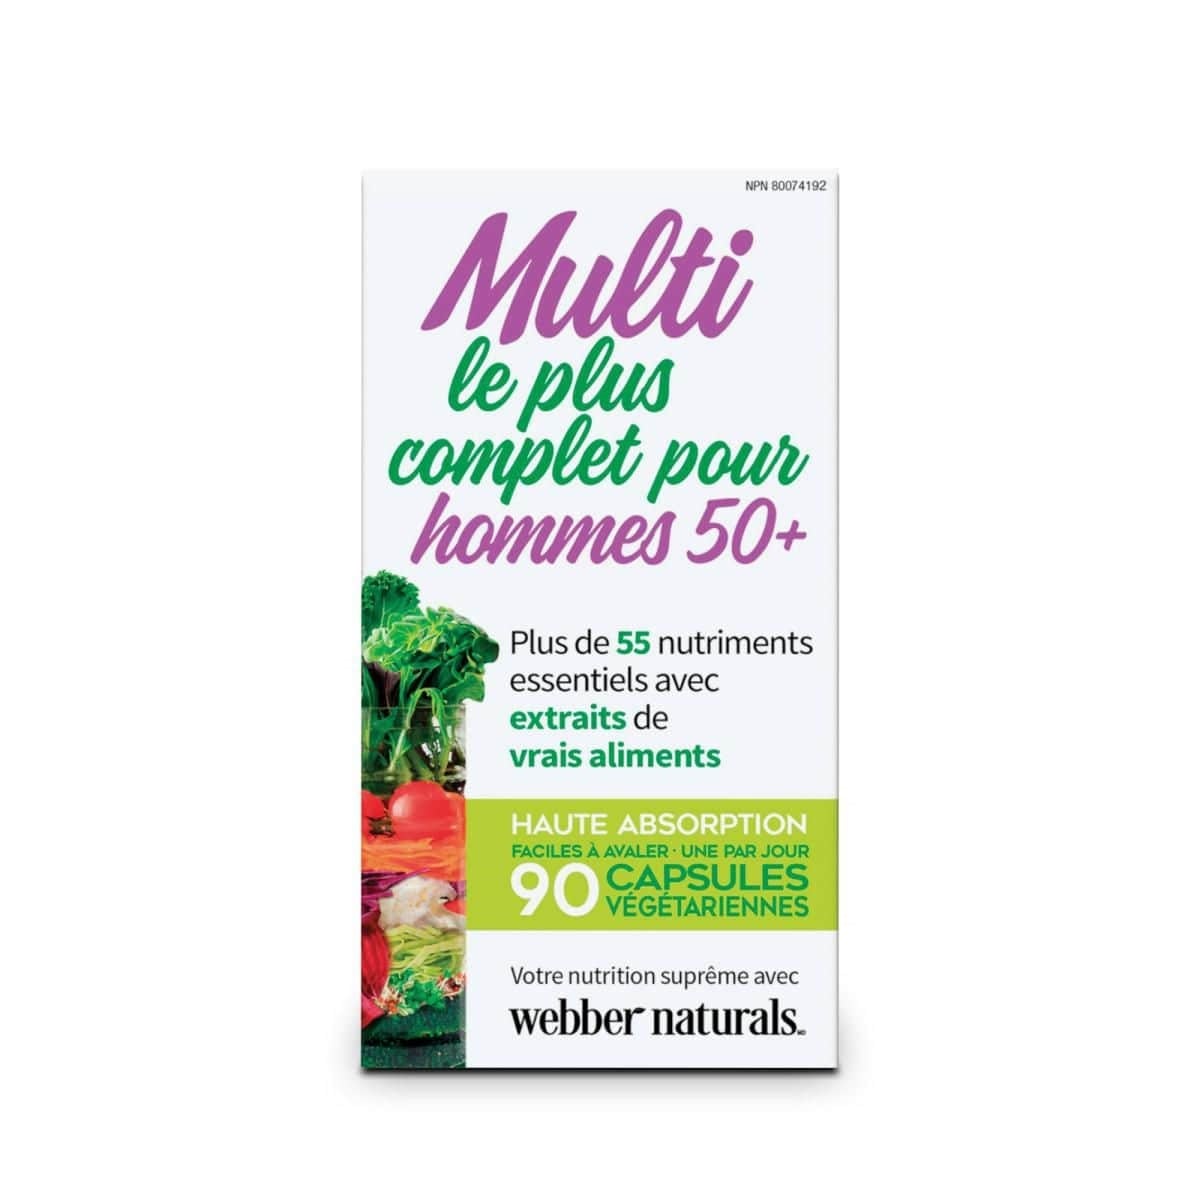 Product label for webber naturals Most Complete Multi Vegi Capsules for Men 50+ (90 capsules) in French